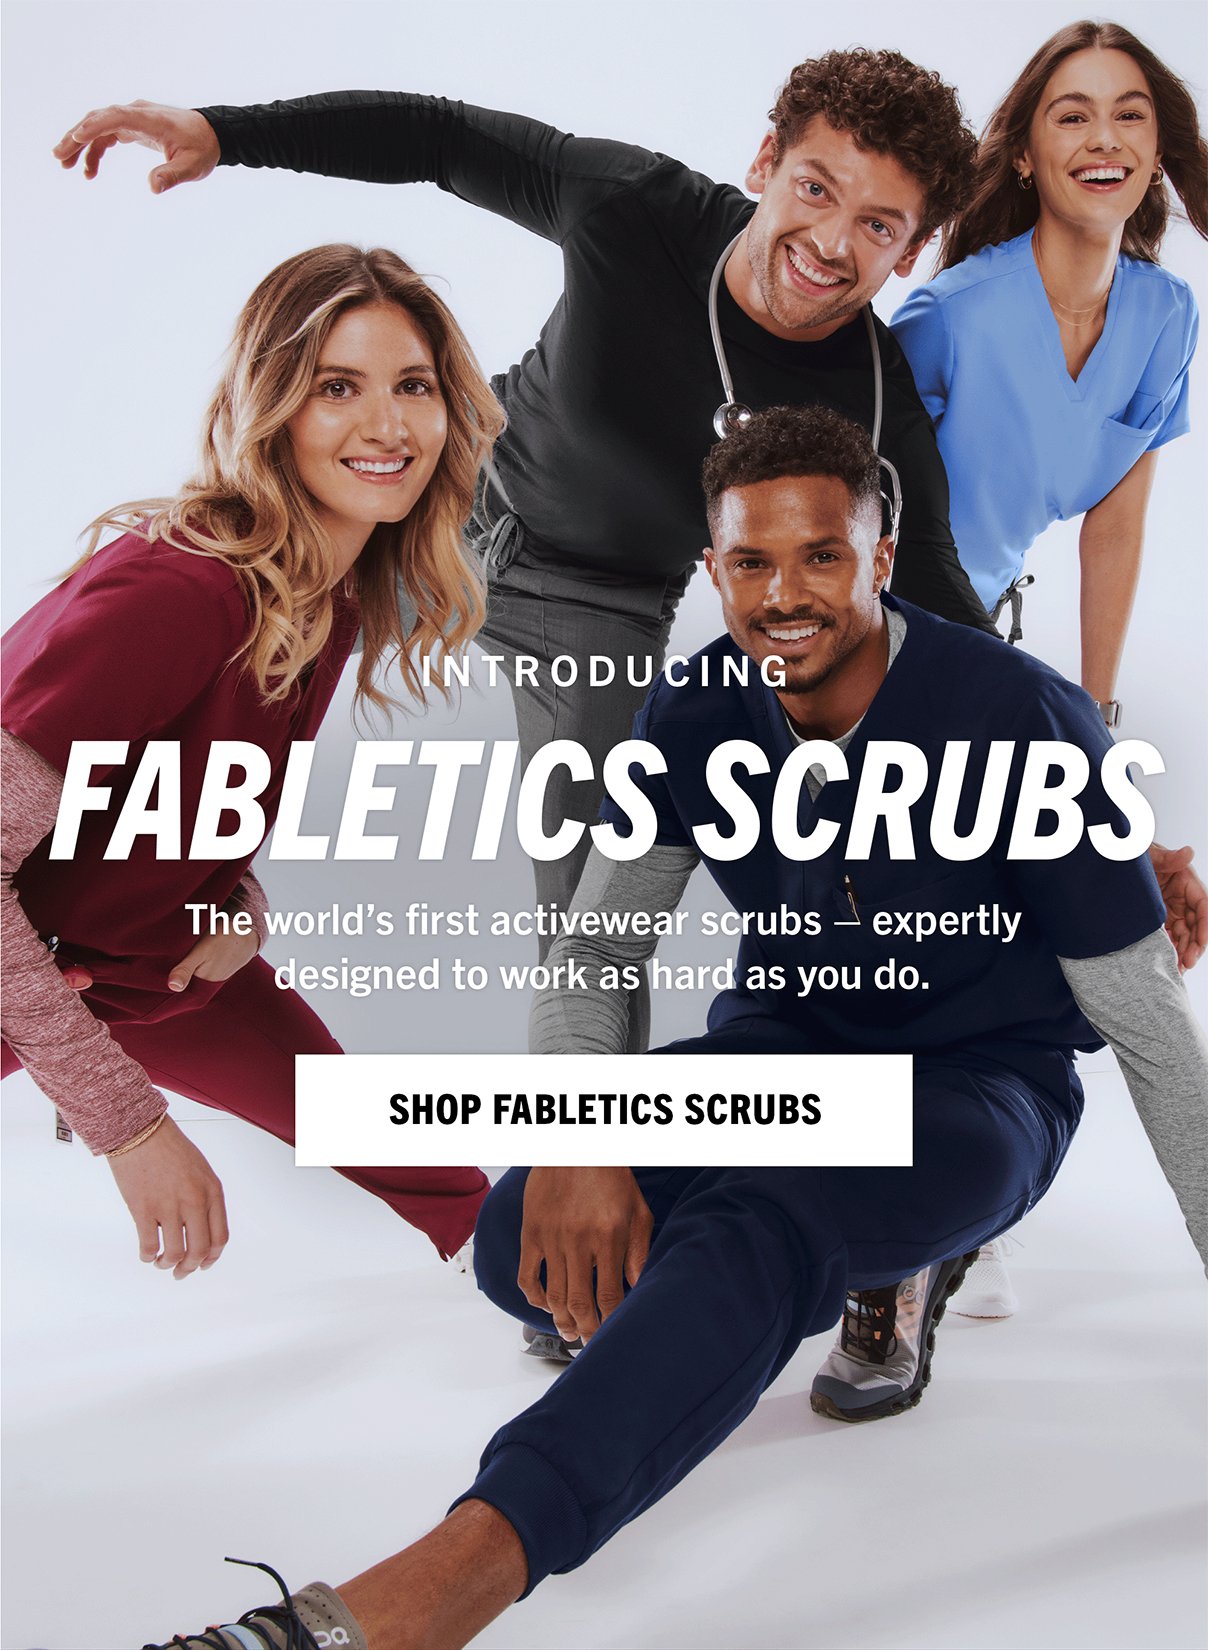 Fabletics Scrubs is finally HERE! - Fabletics